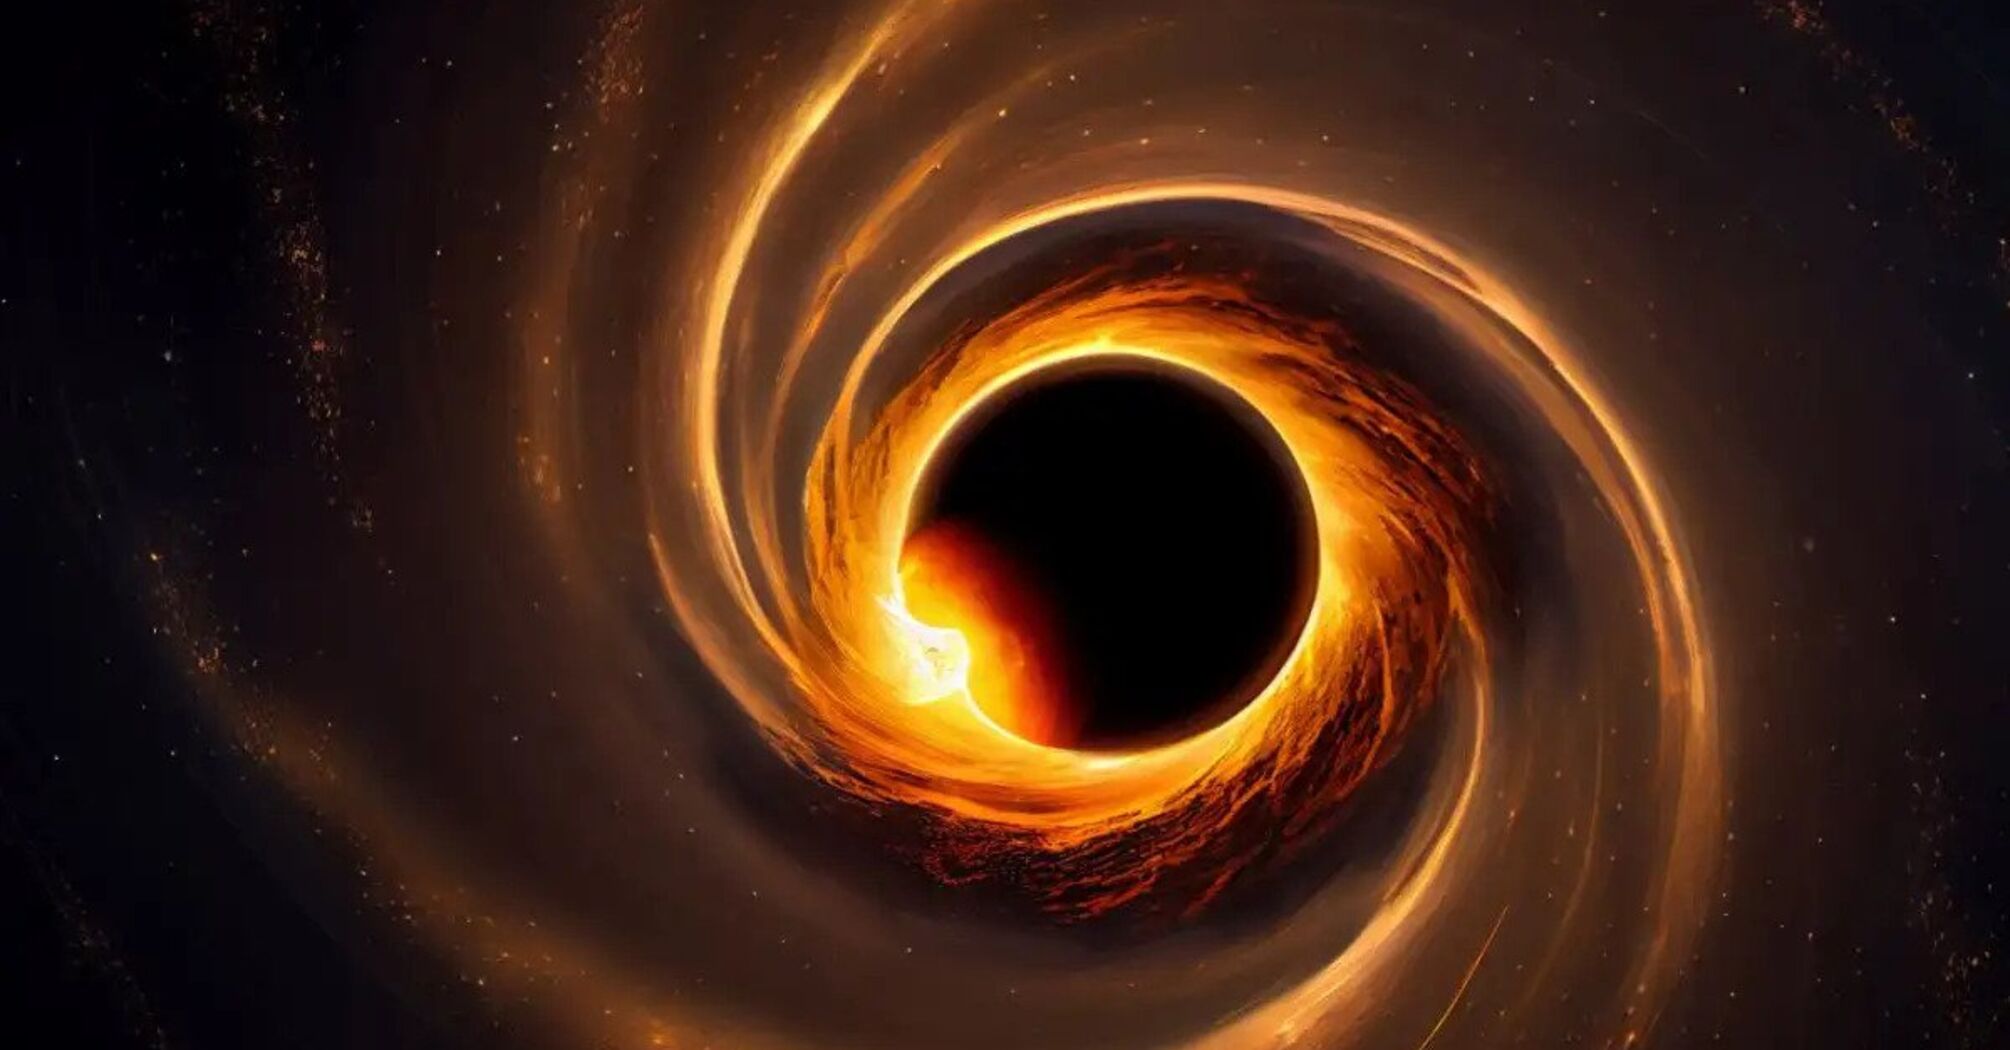 Black hole 'morsels' may finally prove Stephen Hawking's famous theory 